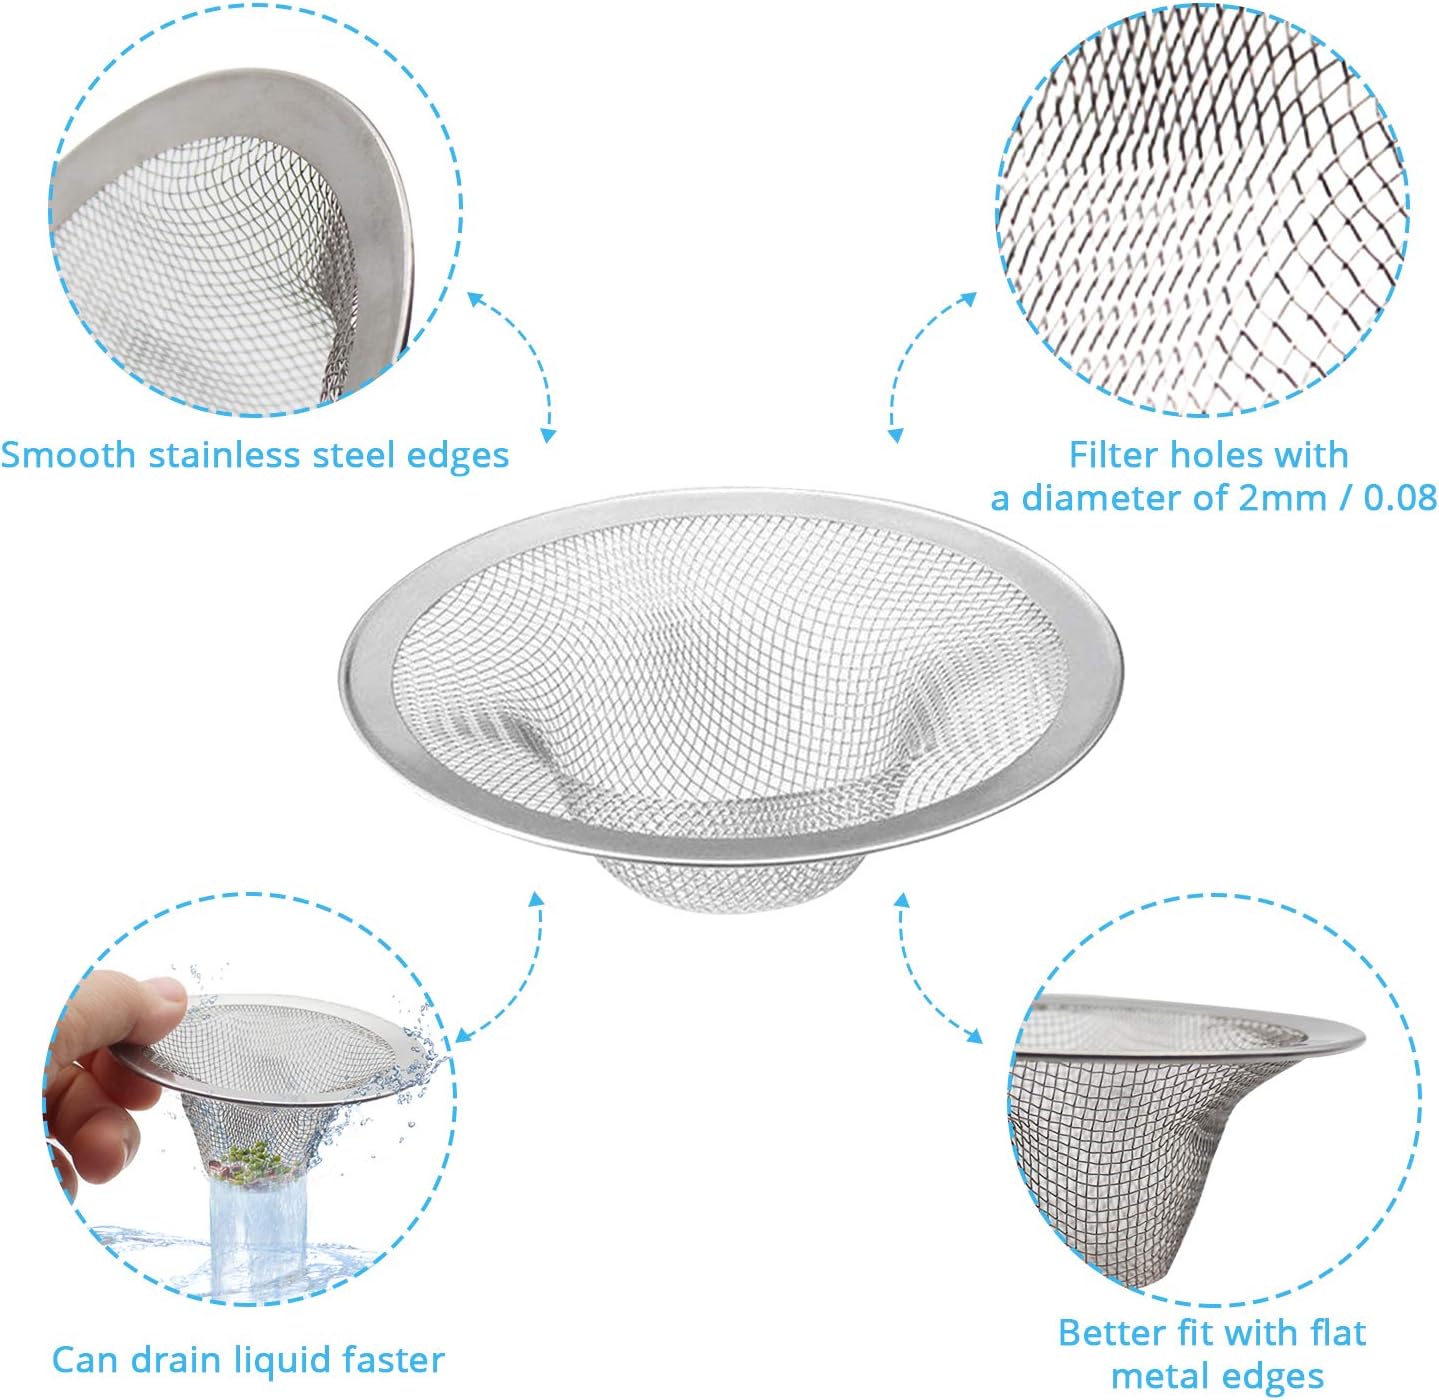 KUFUNG Sink Strainer, Basket Stainless Steel Bathroom Sink Stopper, Utility, Slop, Kitchen and Lavatory Sink Drain Strainer Hair Catch